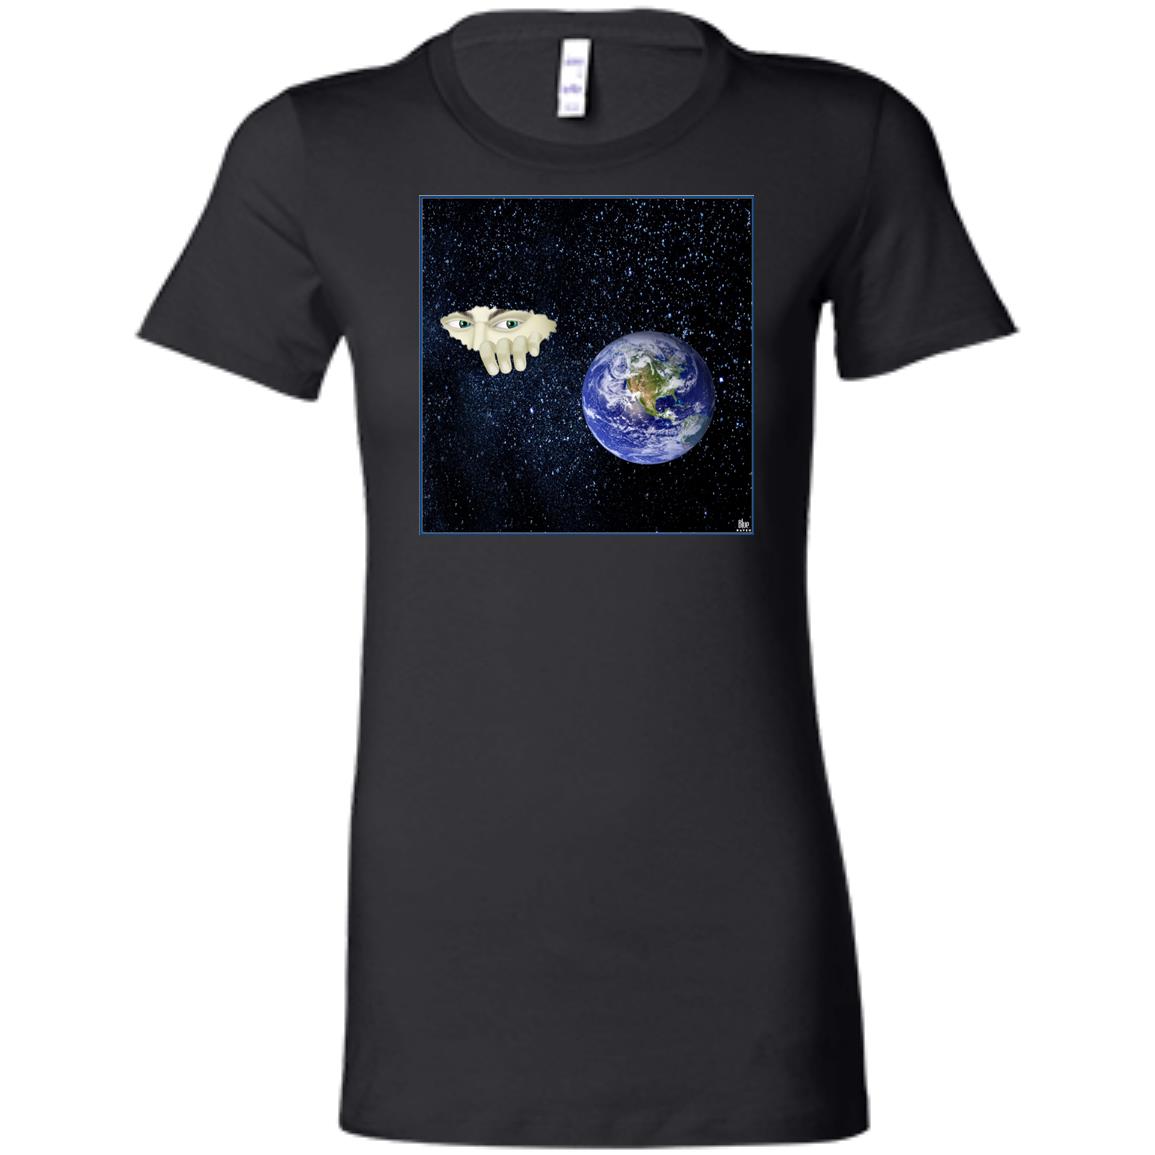 SOMEWHERE OUT THERE - Women's Fitted T-Shirt